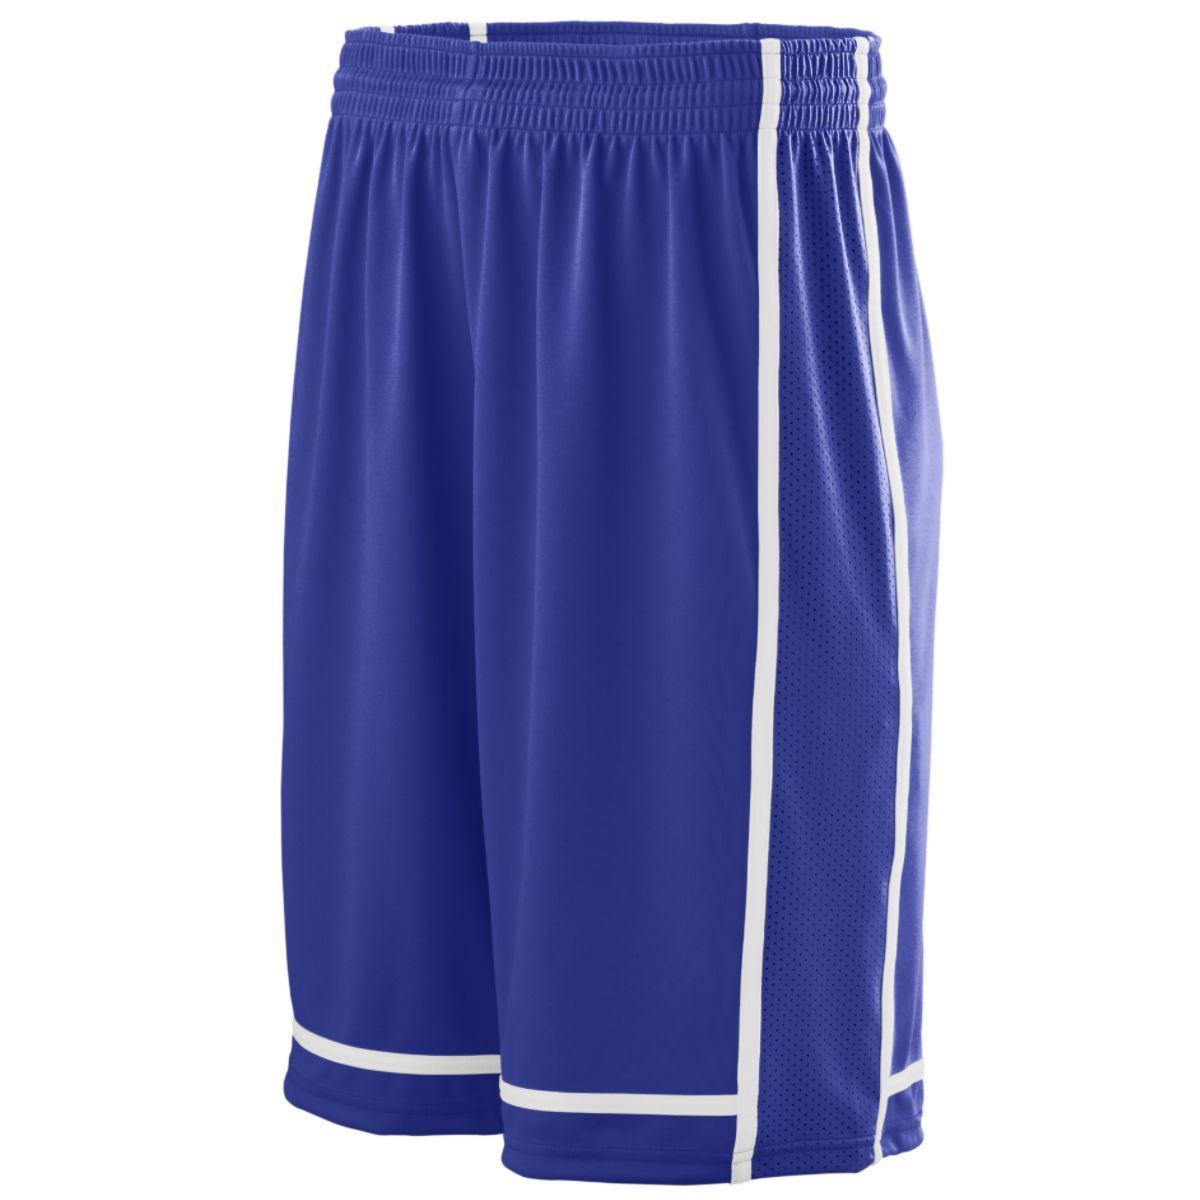 Augusta Sportswear Winning Streak Shorts in Purple/White  -Part of the Adult, Adult-Shorts, Augusta-Products, Basketball, All-Sports, All-Sports-1 product lines at KanaleyCreations.com